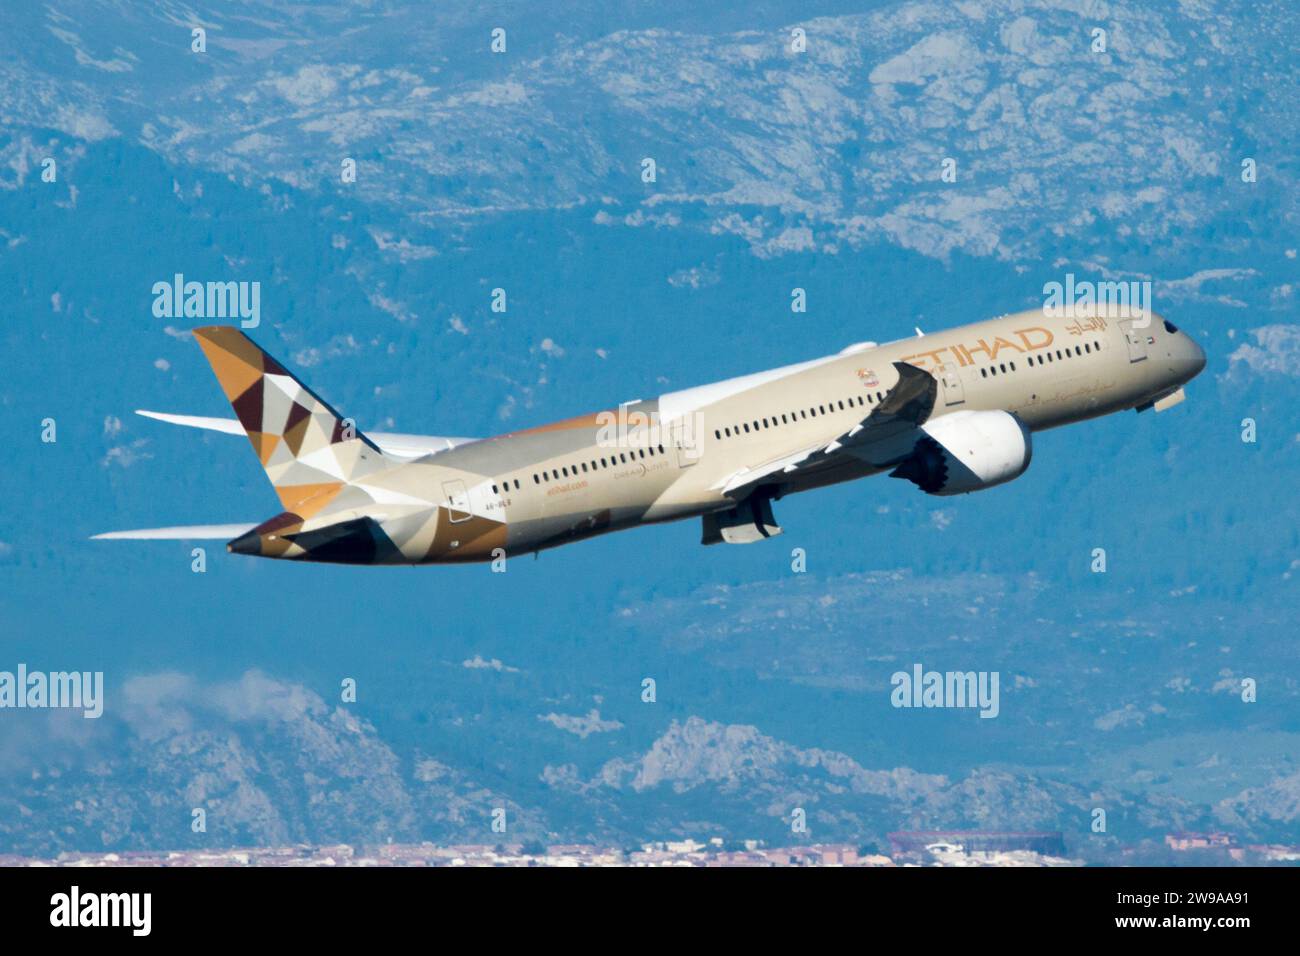 Boeing 787 airliner of the Etihad airline Stock Photo